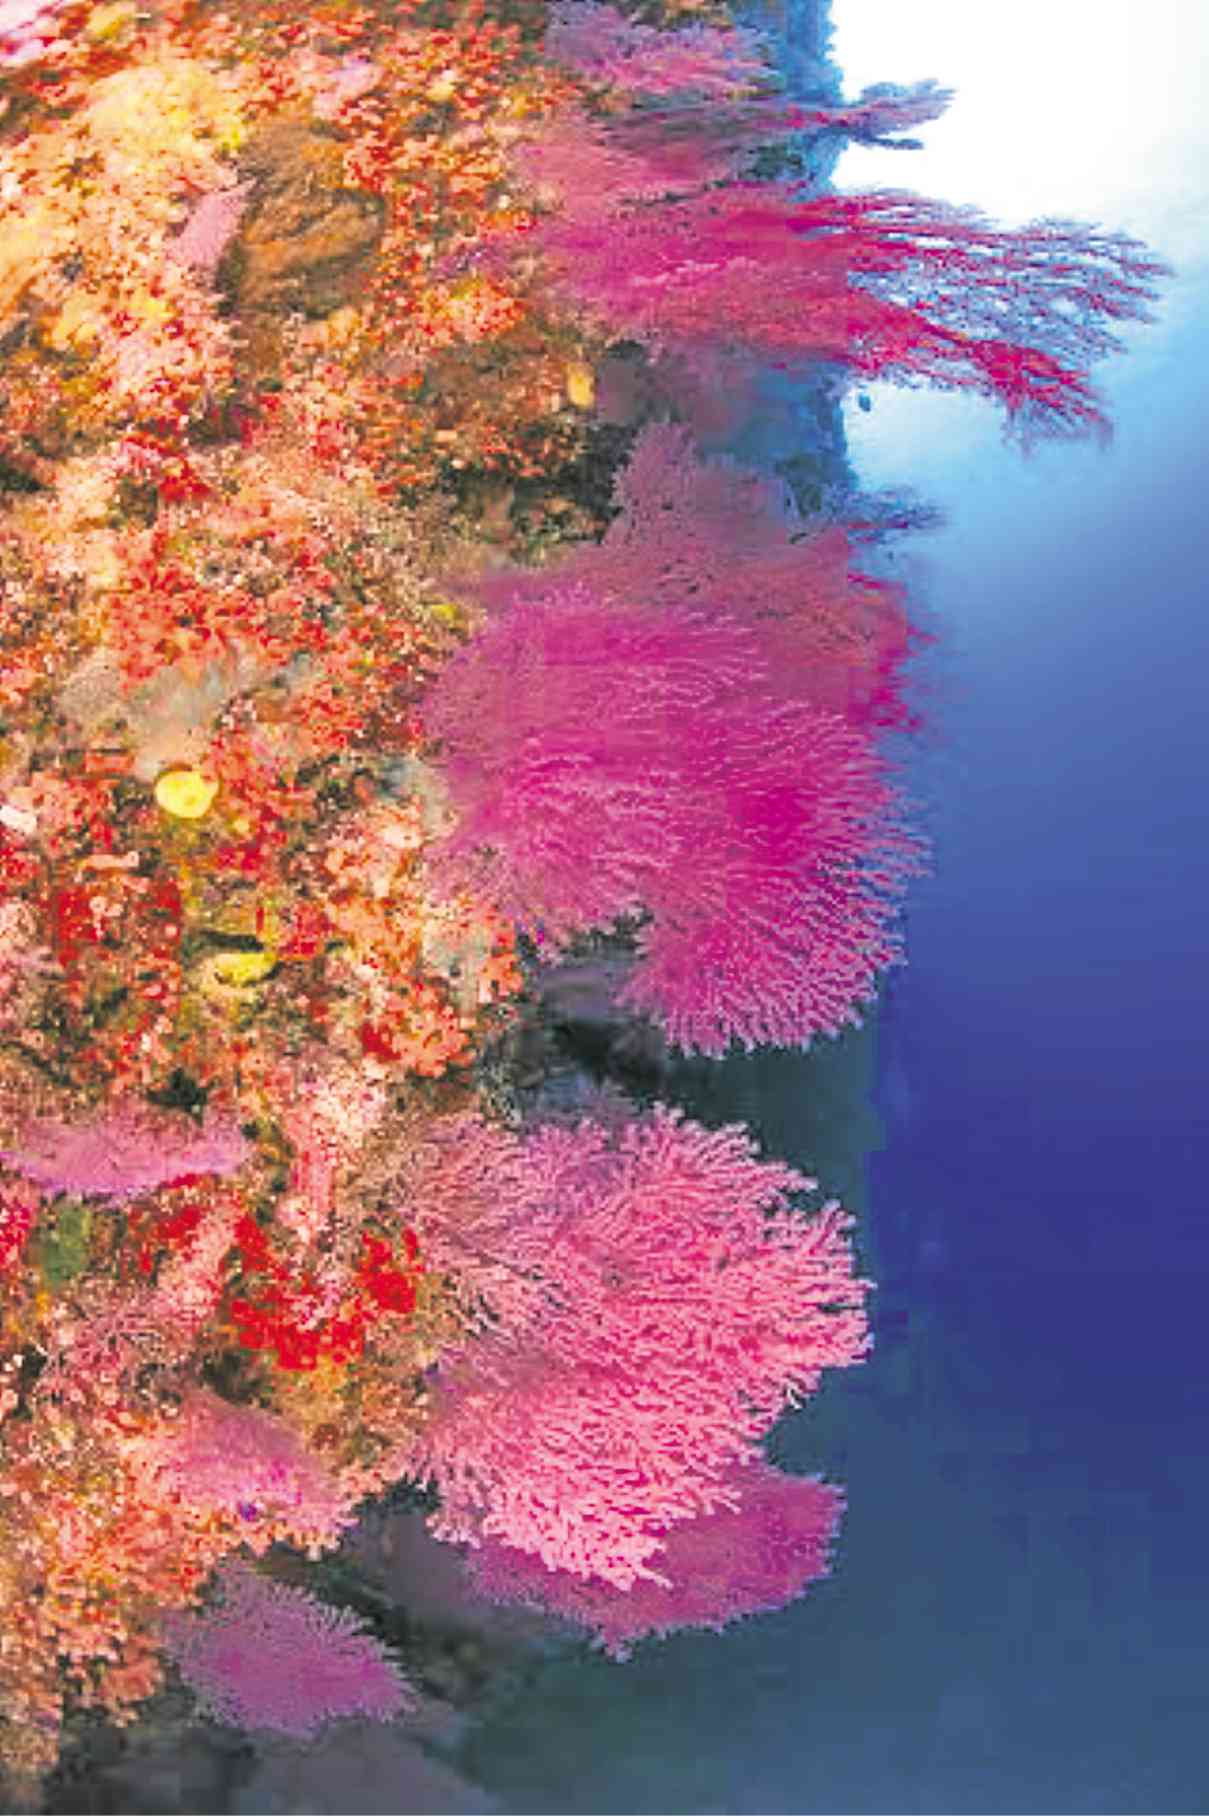 HUGE, colorful sea fans thrive in Tubbataha’s rich waters. BETHWATSON